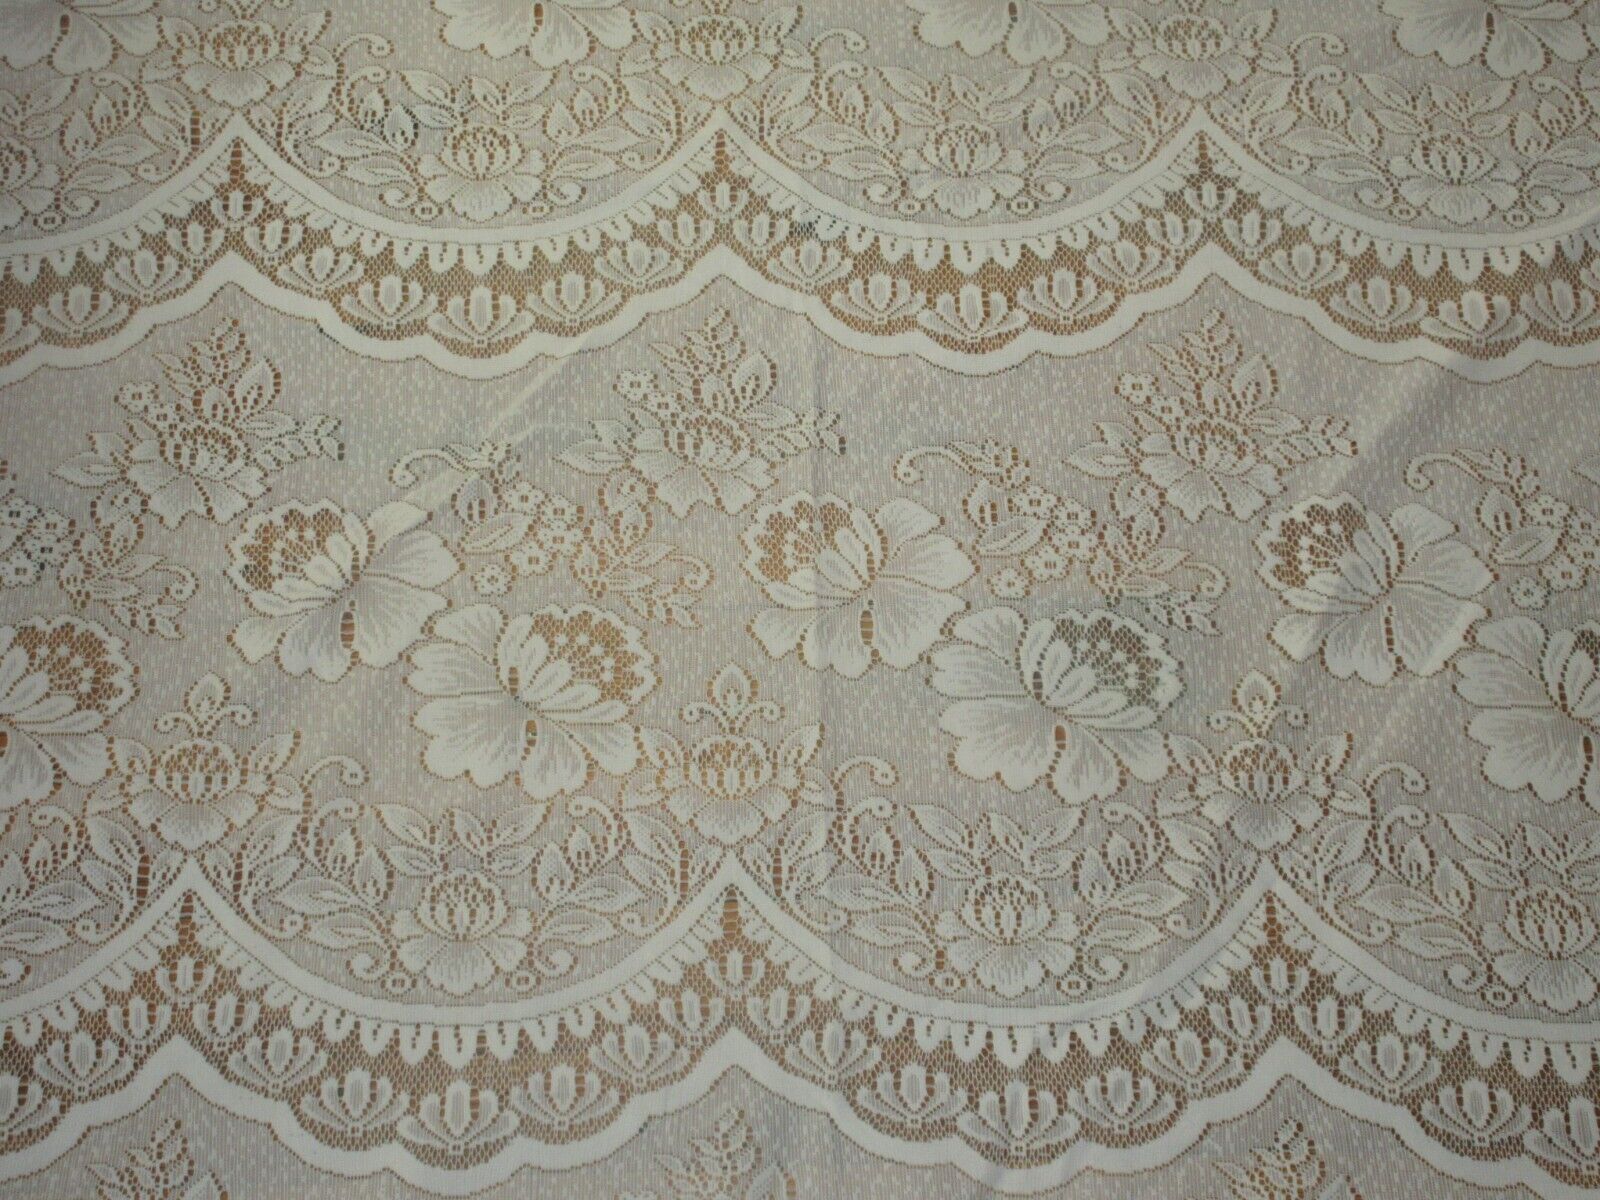 Vintage Ivory Scalloped Floral Window Lace Fabric Panel 55x50